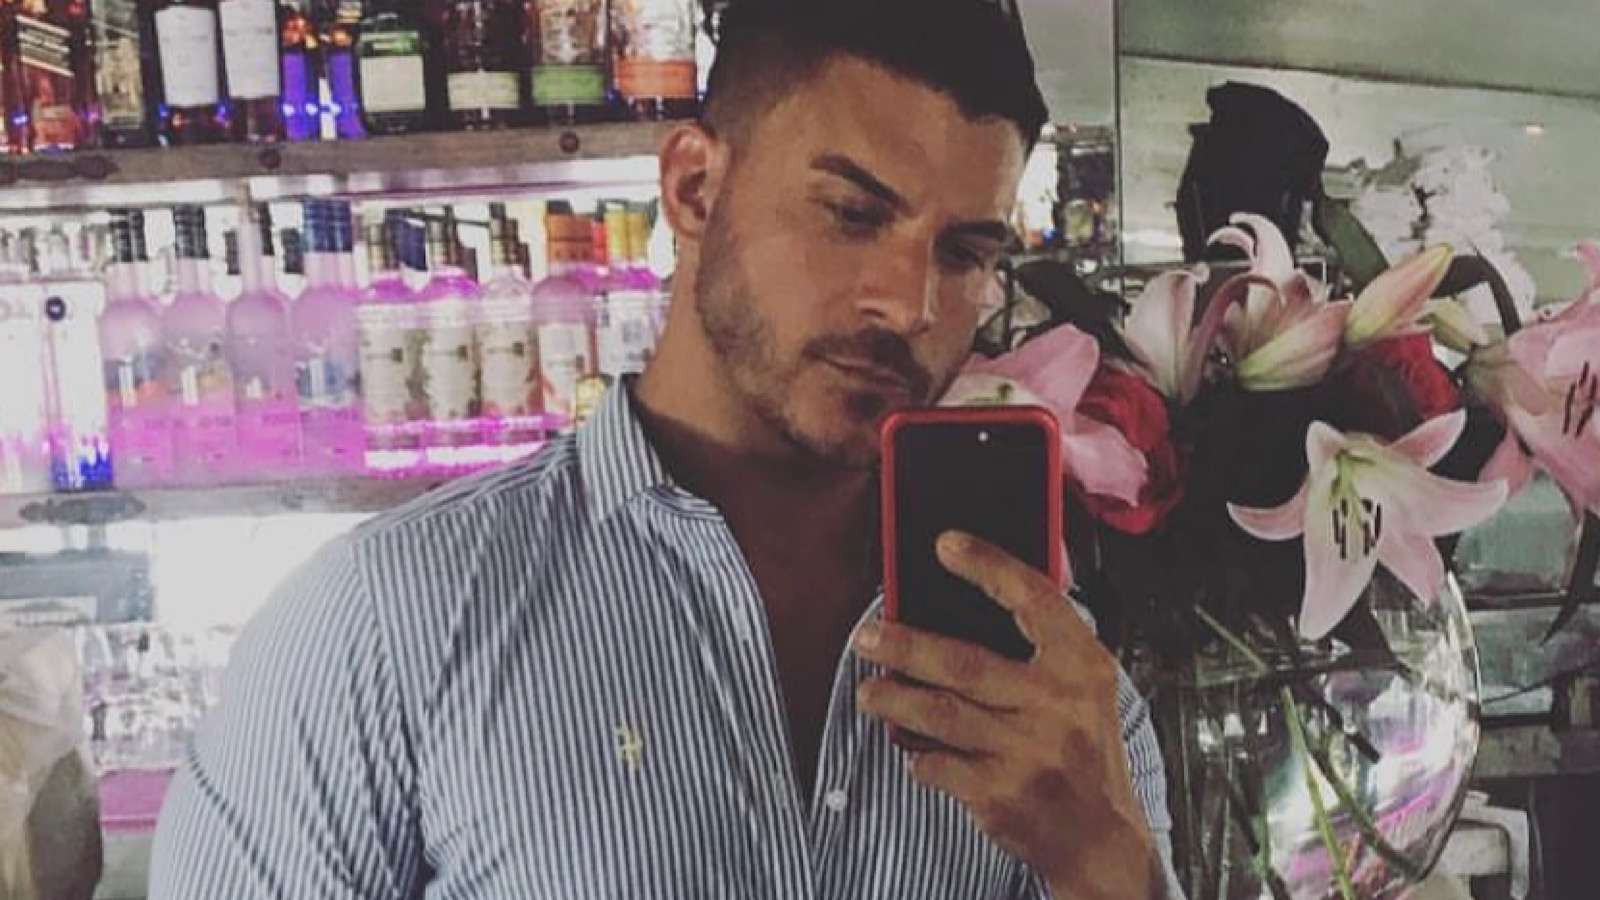 jax taylor delayed a flight over two hours after throwing a fit